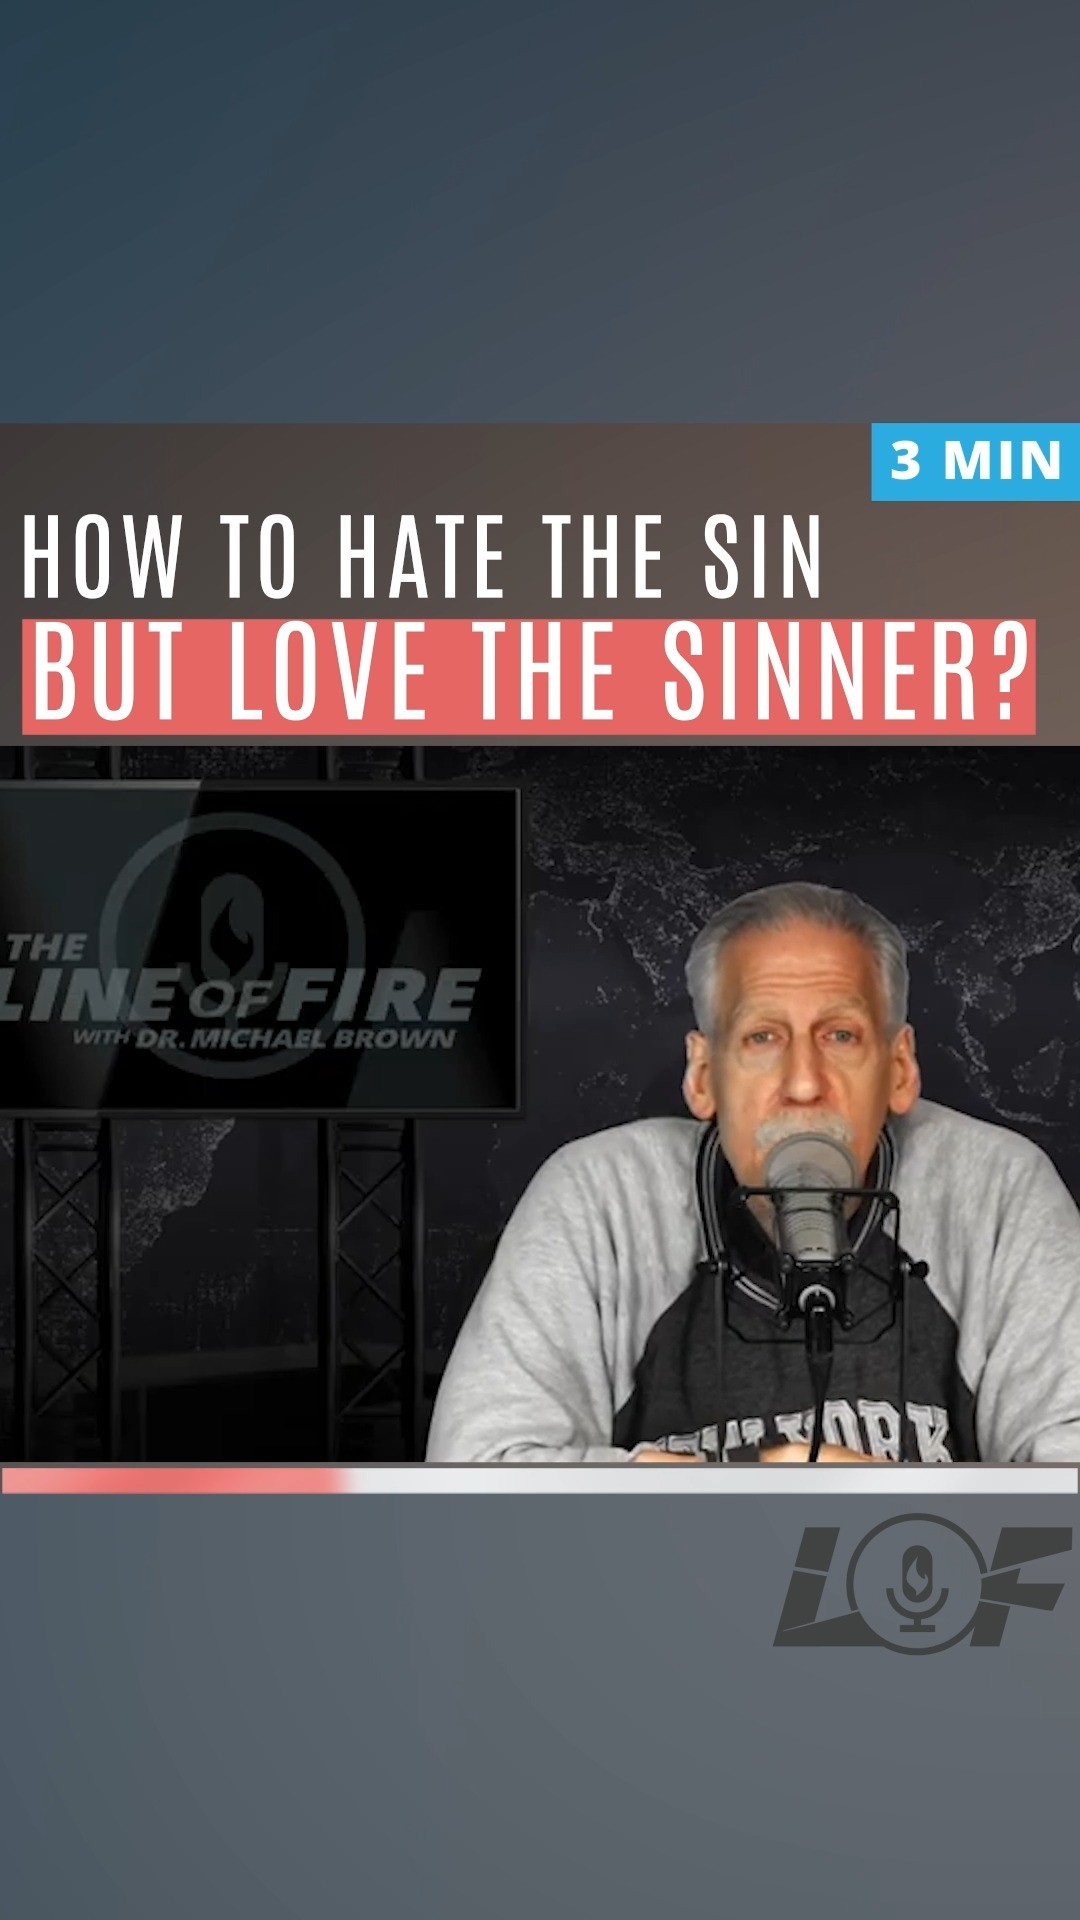 How To Hate The Sin But Love The Sinner?
To love those who cause so much harm and destruction is easier said than done. Should we always love the sinner?